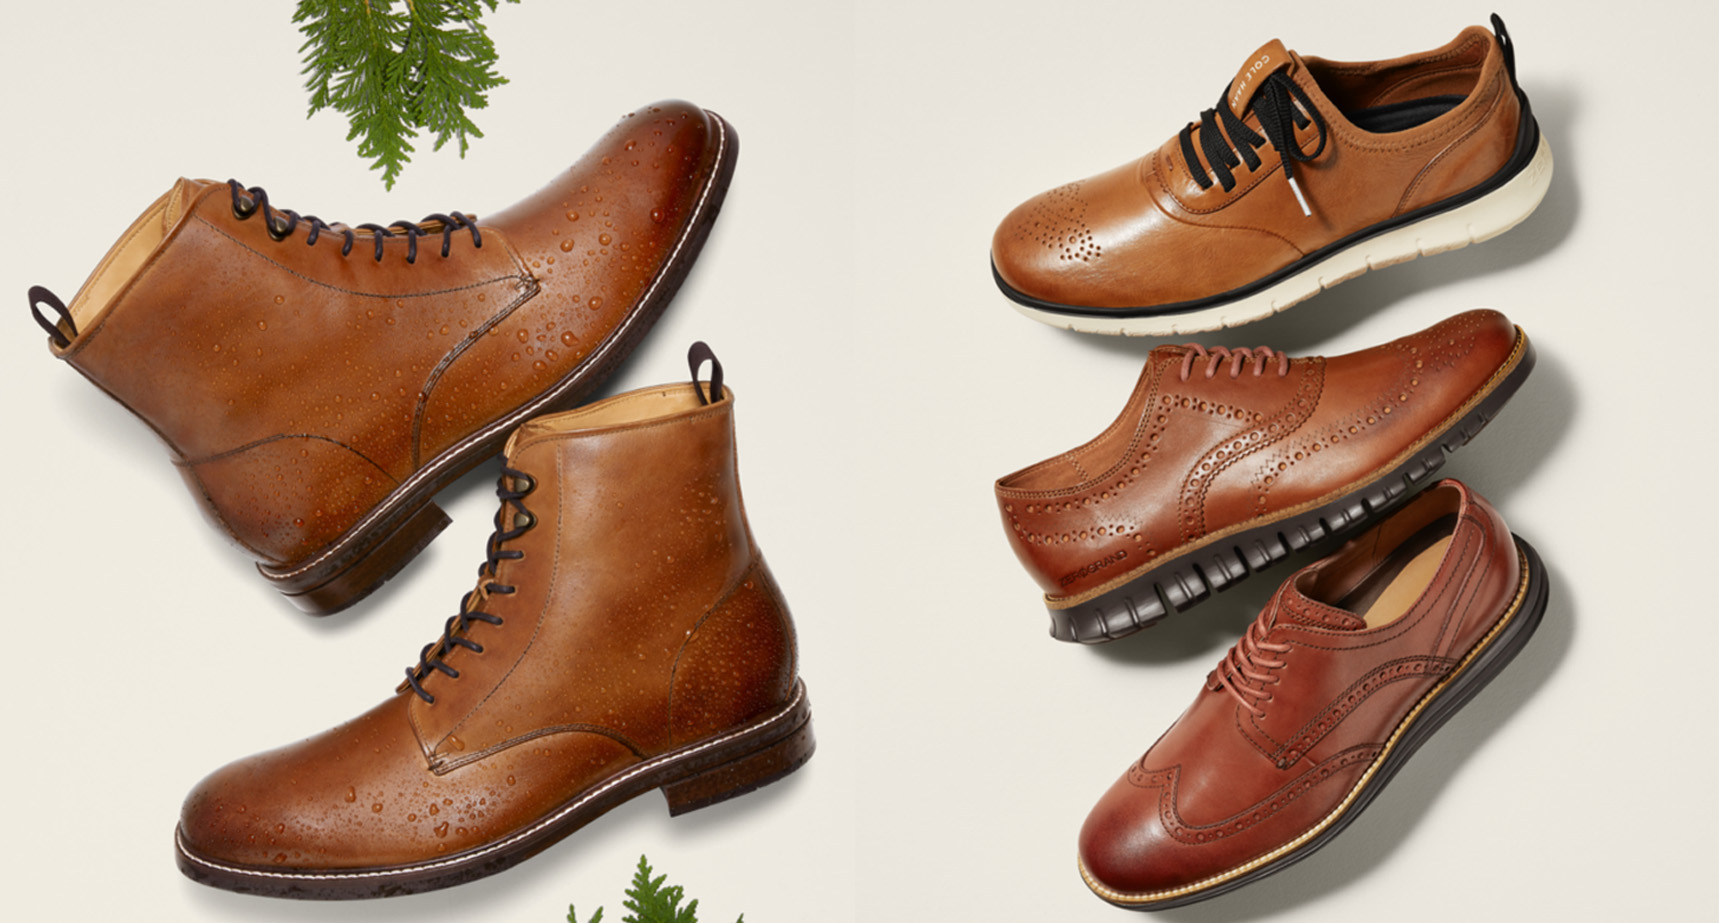 cole haan outlet black friday